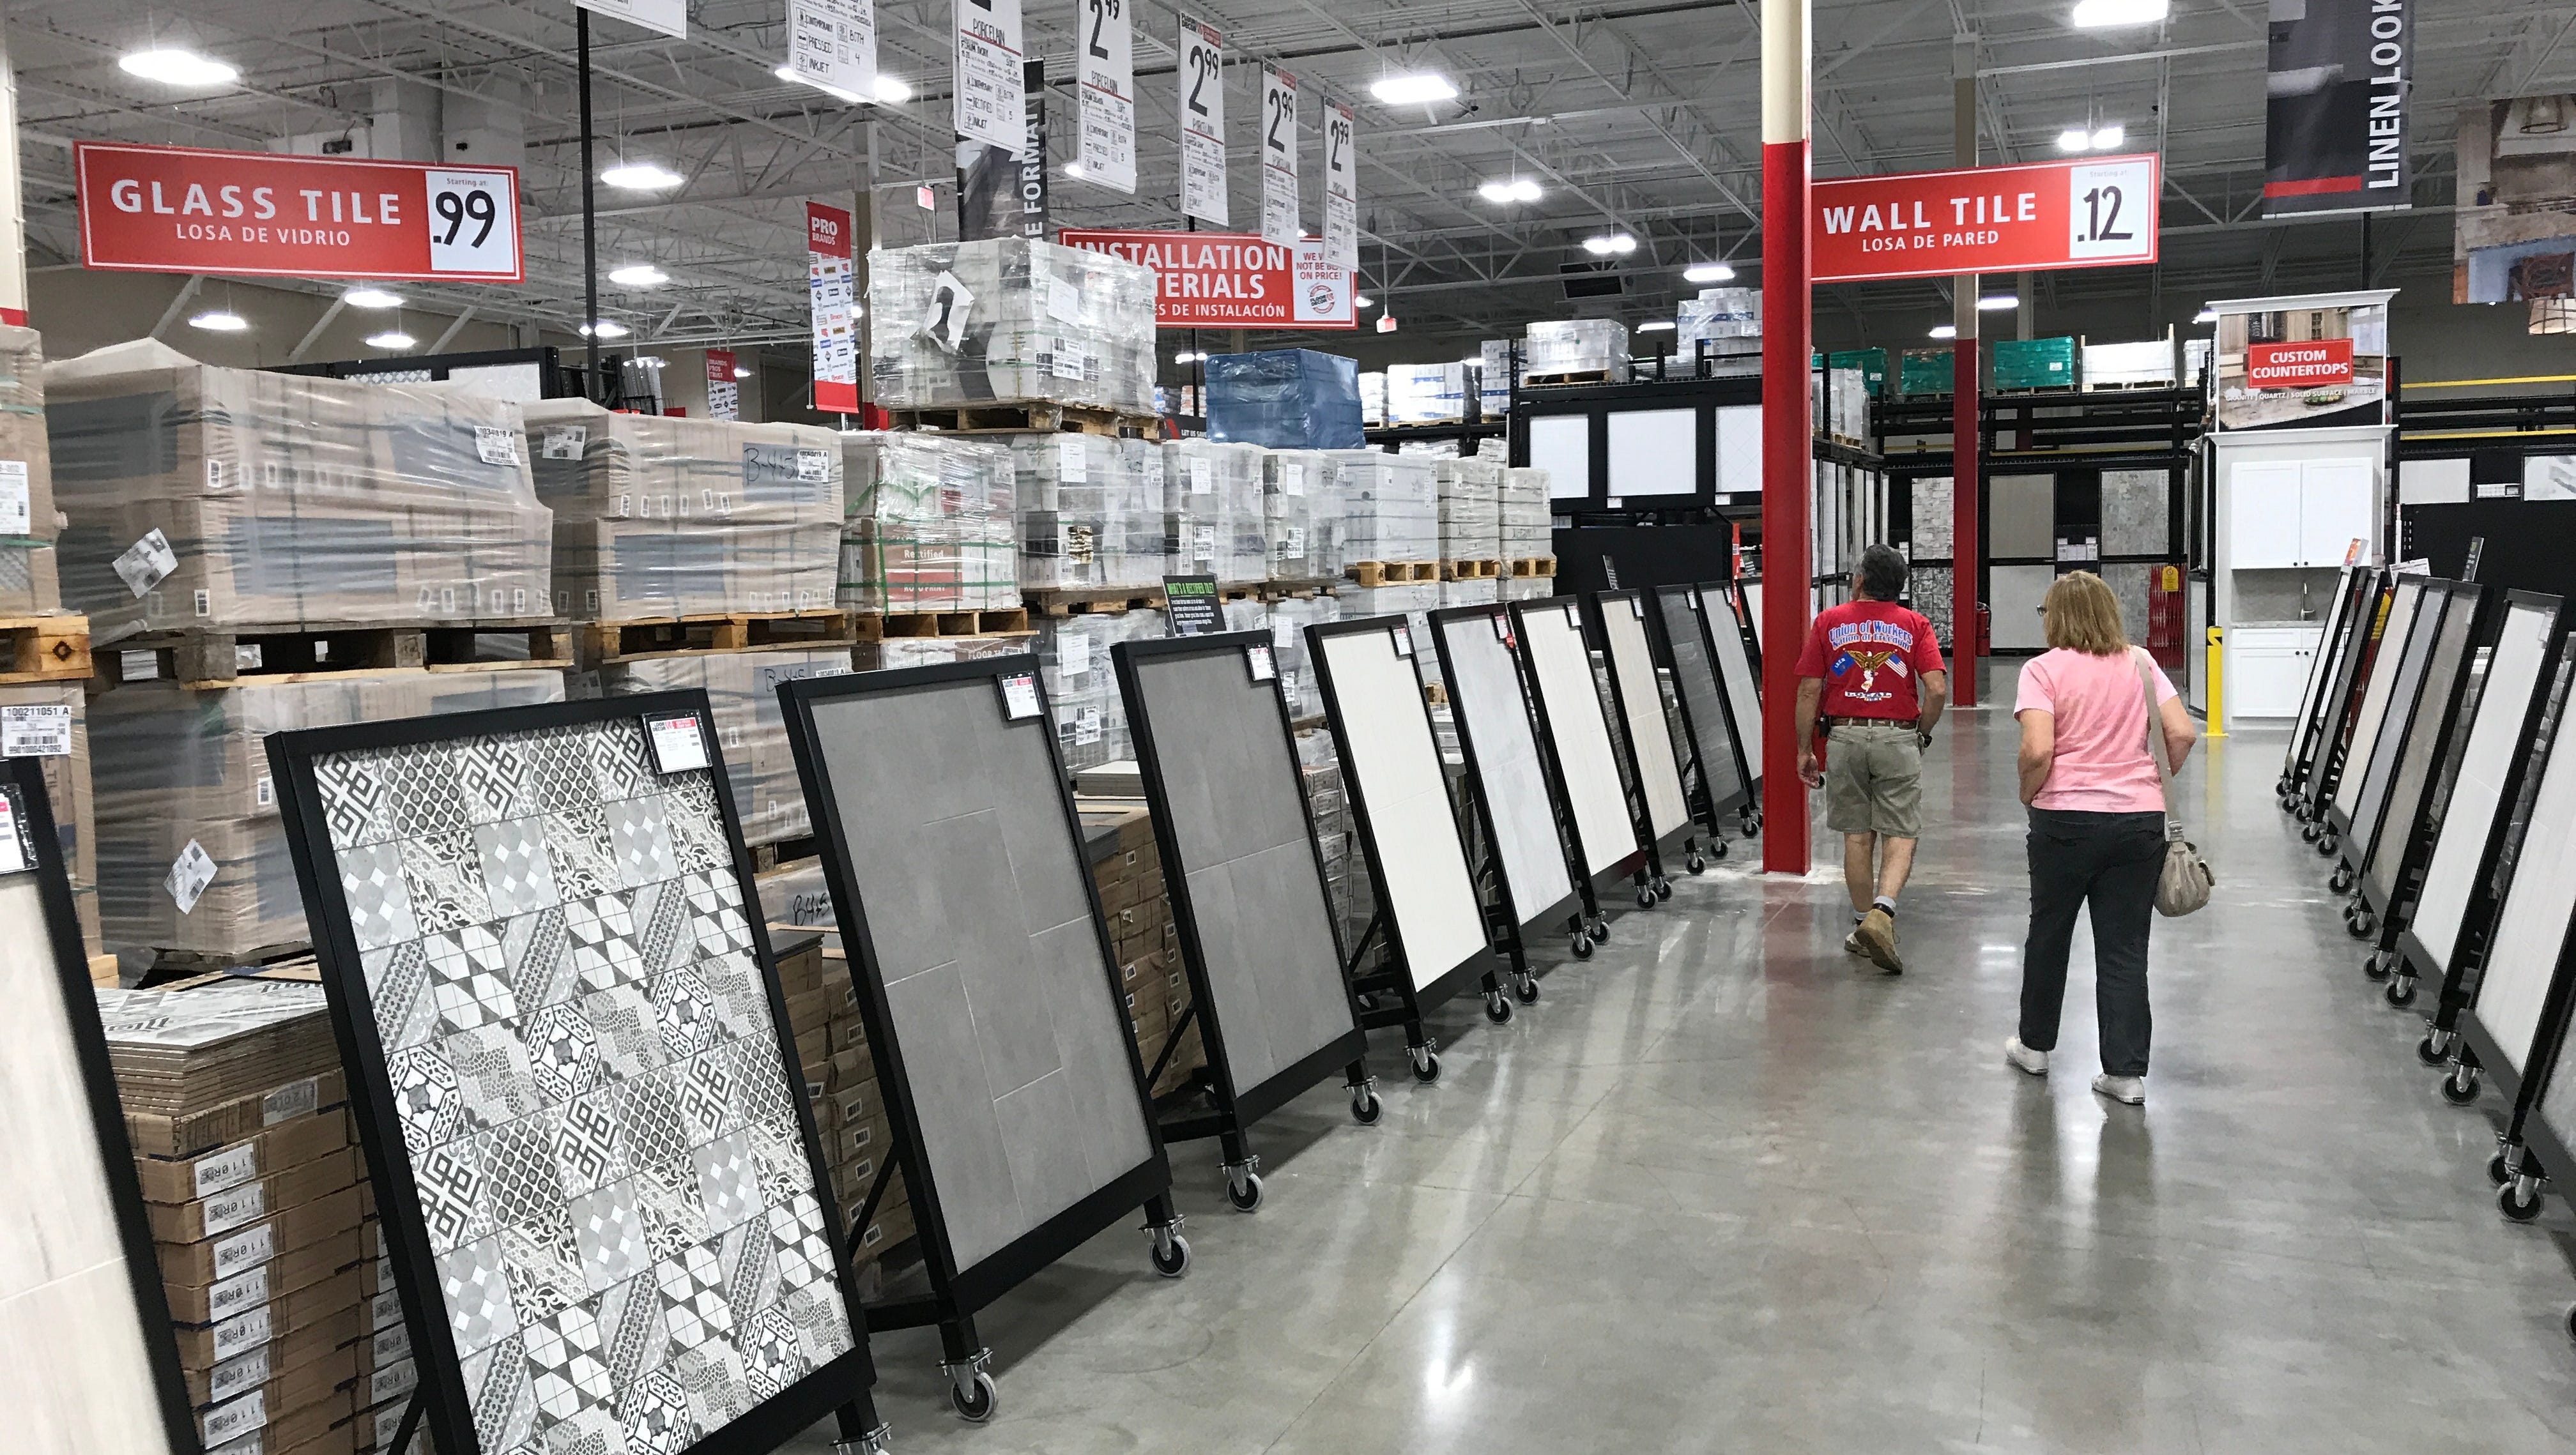 Floor & Decor expands its footprint in New Jersey with third store